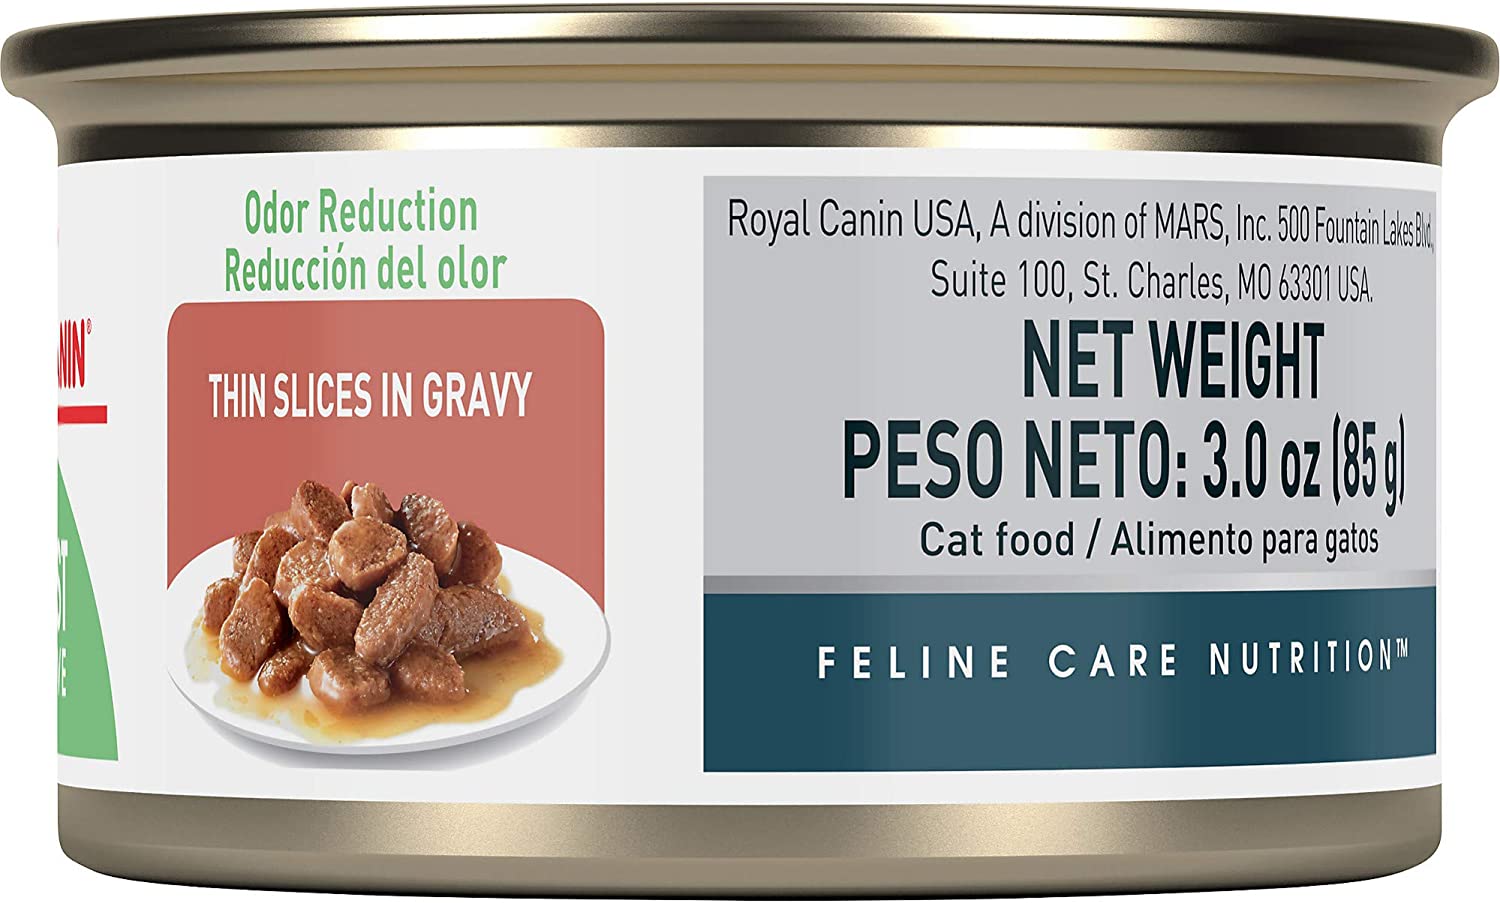 Royal Canin Digest Sensitive Thin Slices in Gravy Wet Cat Food, 3 oz can, 24 count